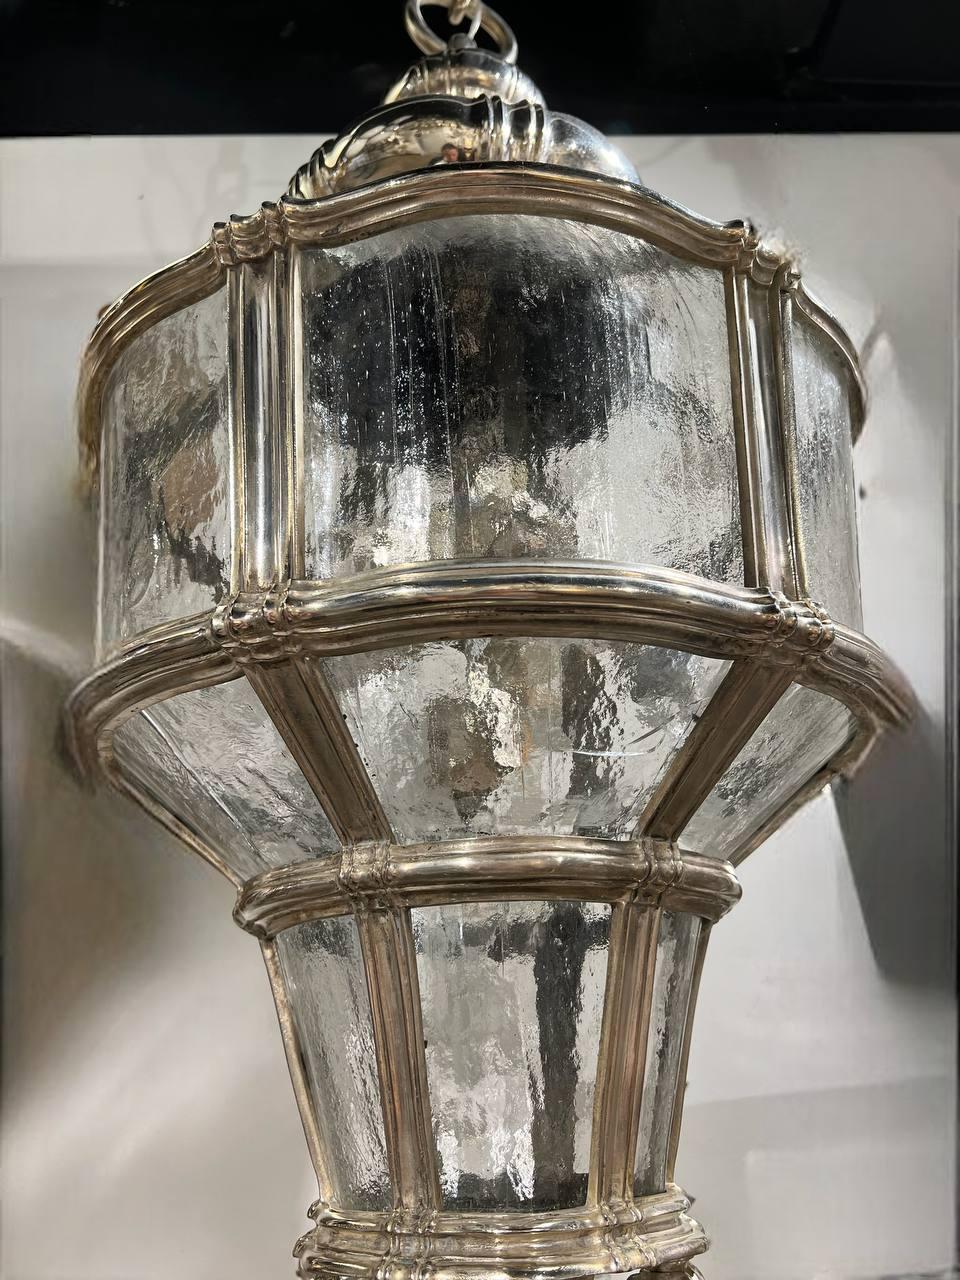 A circa late 19 centuru Caldwell silver plated lantern with 6 interior lights, from Waldorf Hotel in NYC